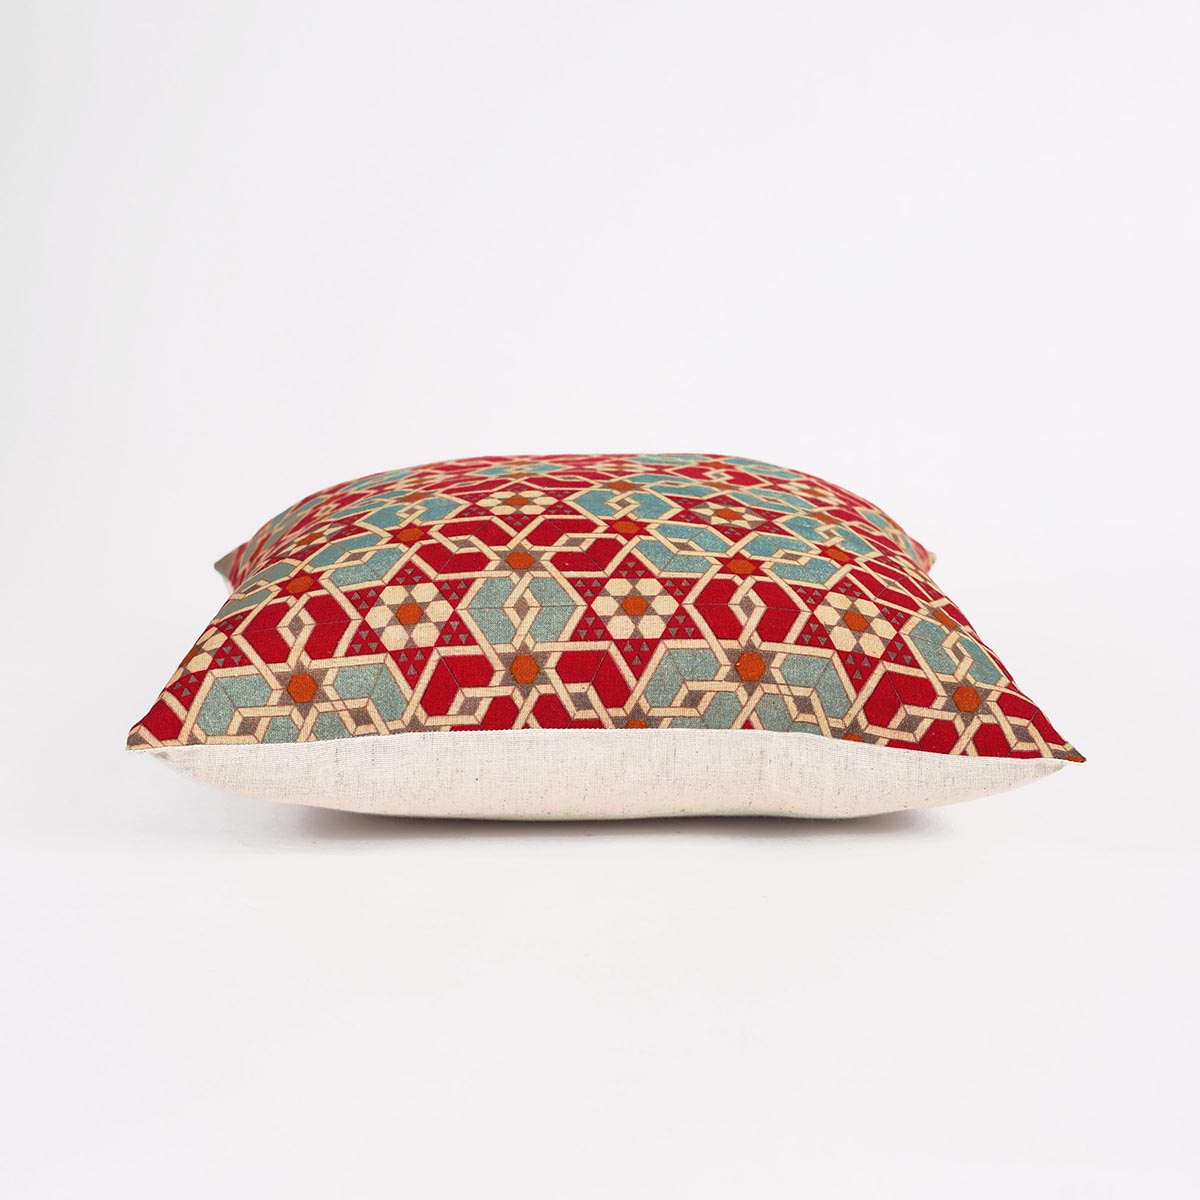 Zellij - Pillow cover with Islamic geometrical pattern print, sizes available